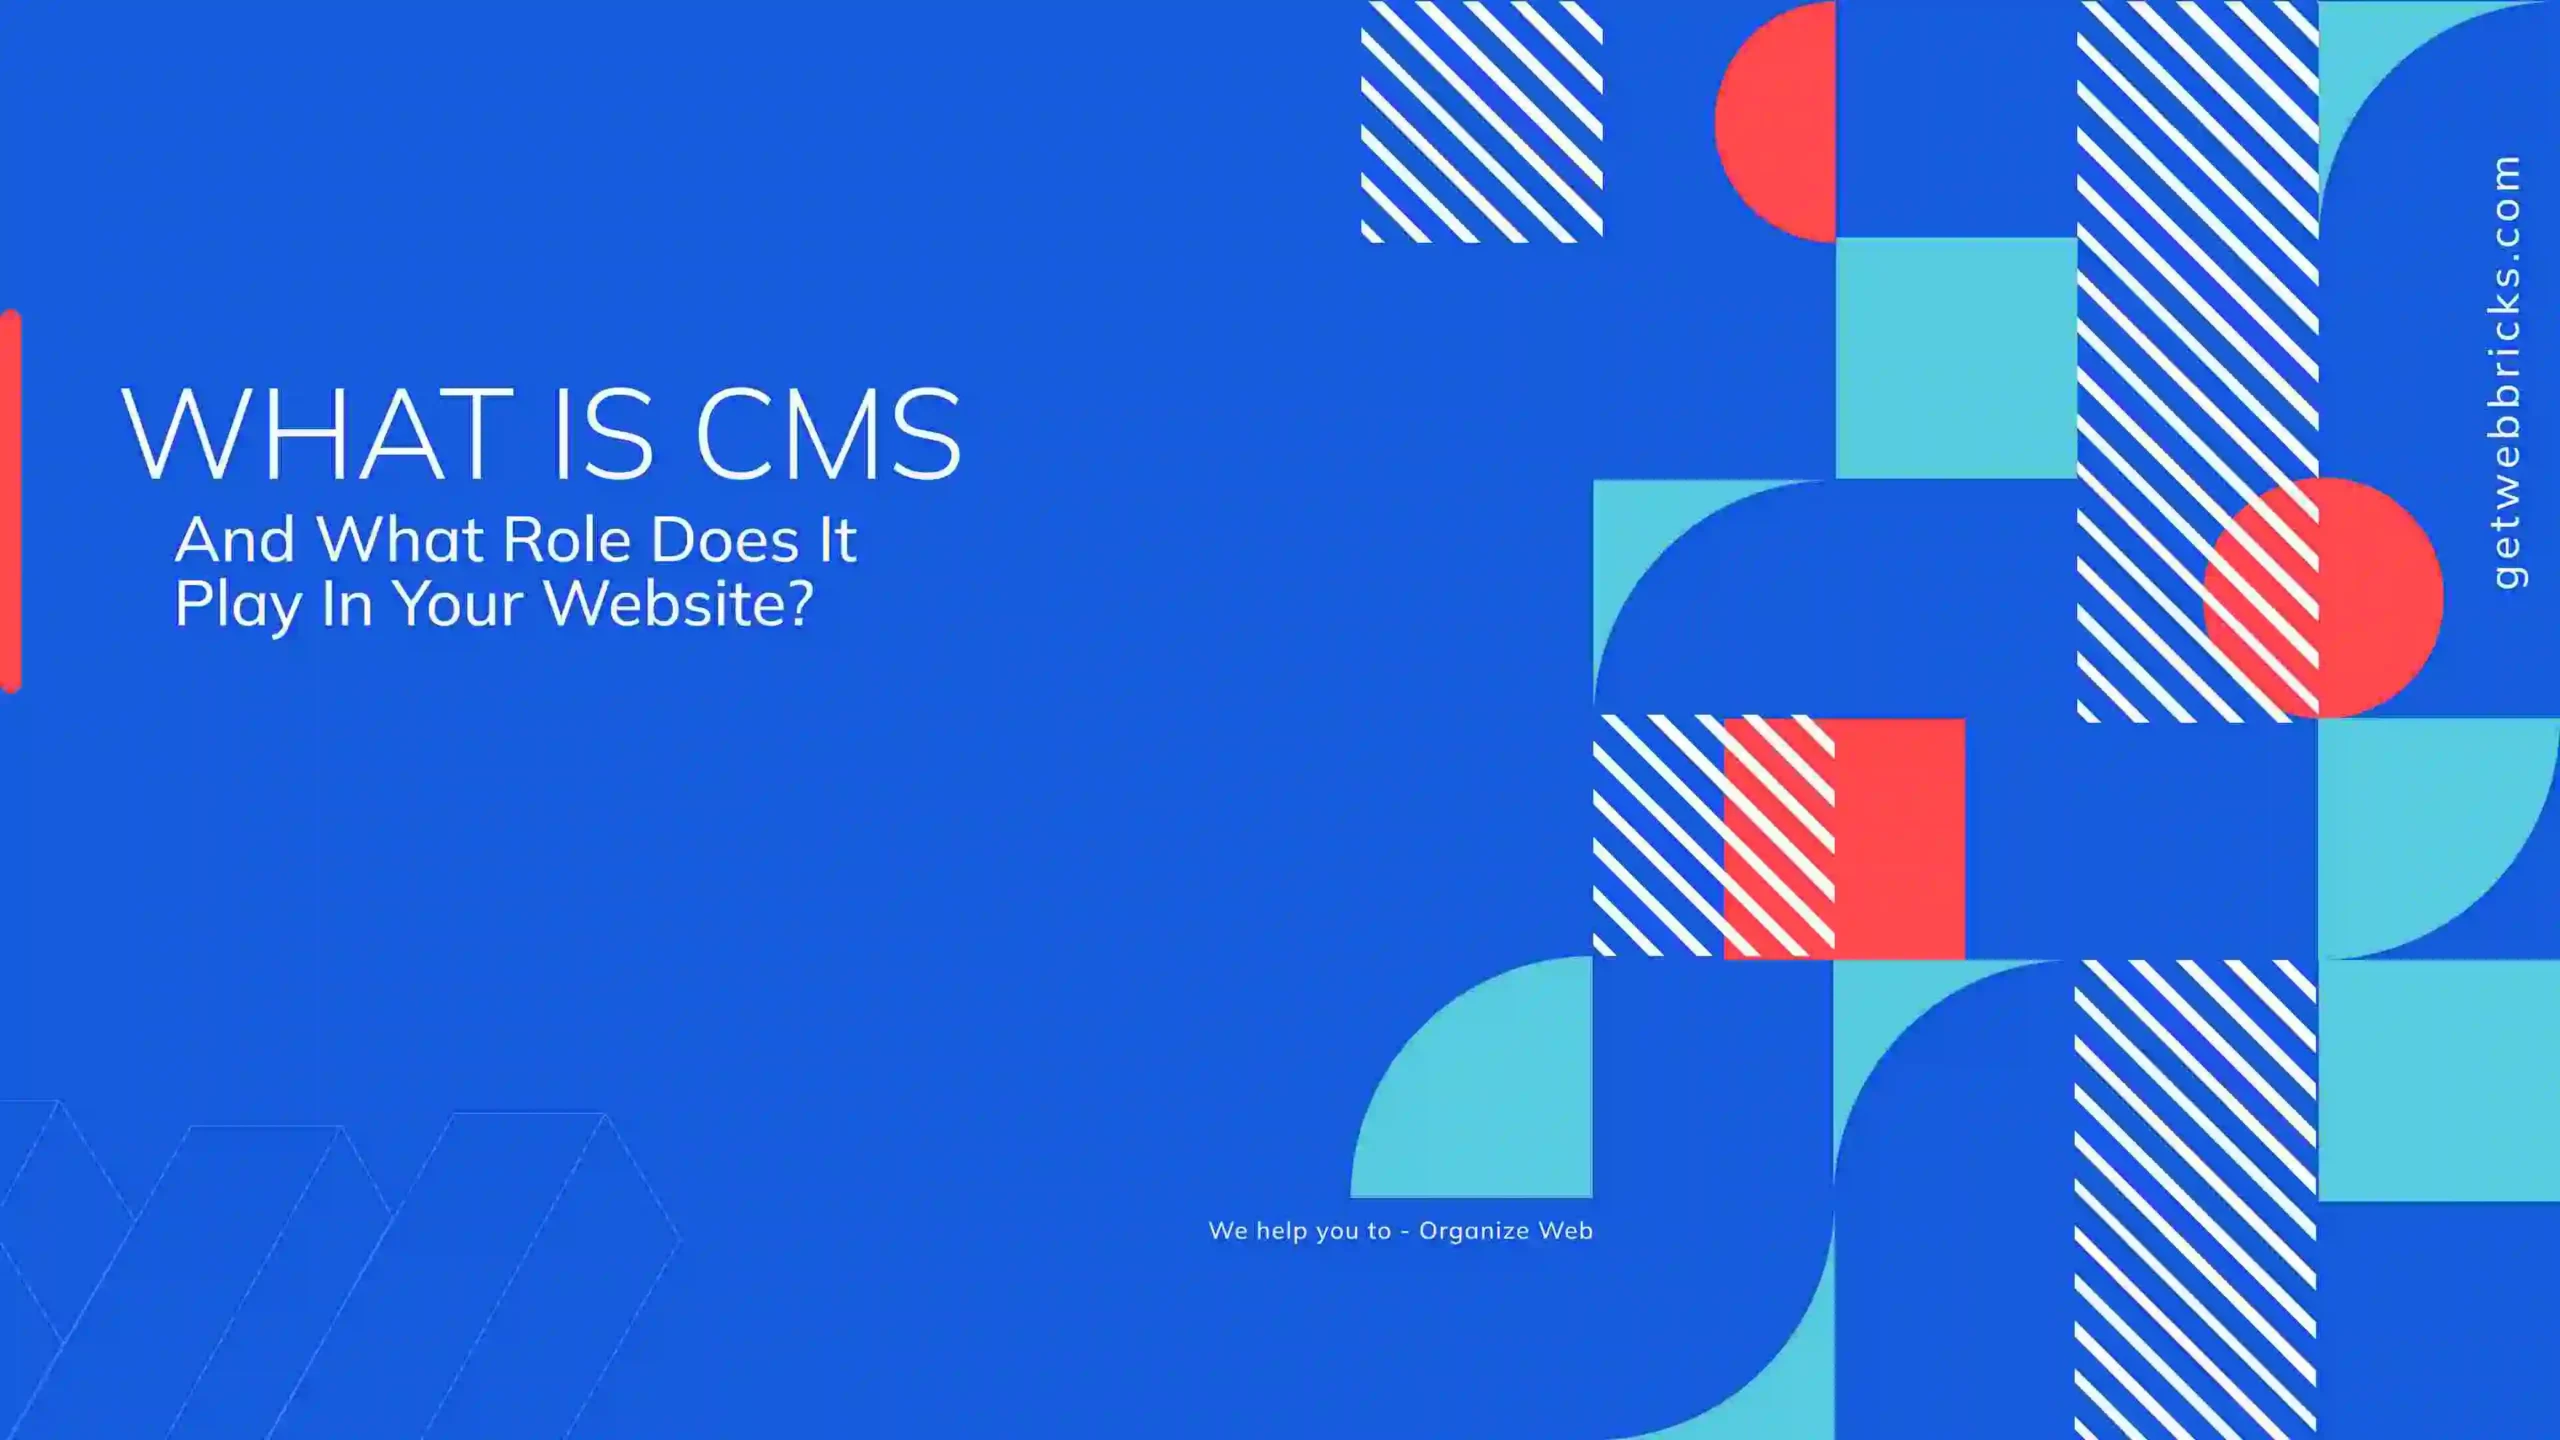 What is CMS?